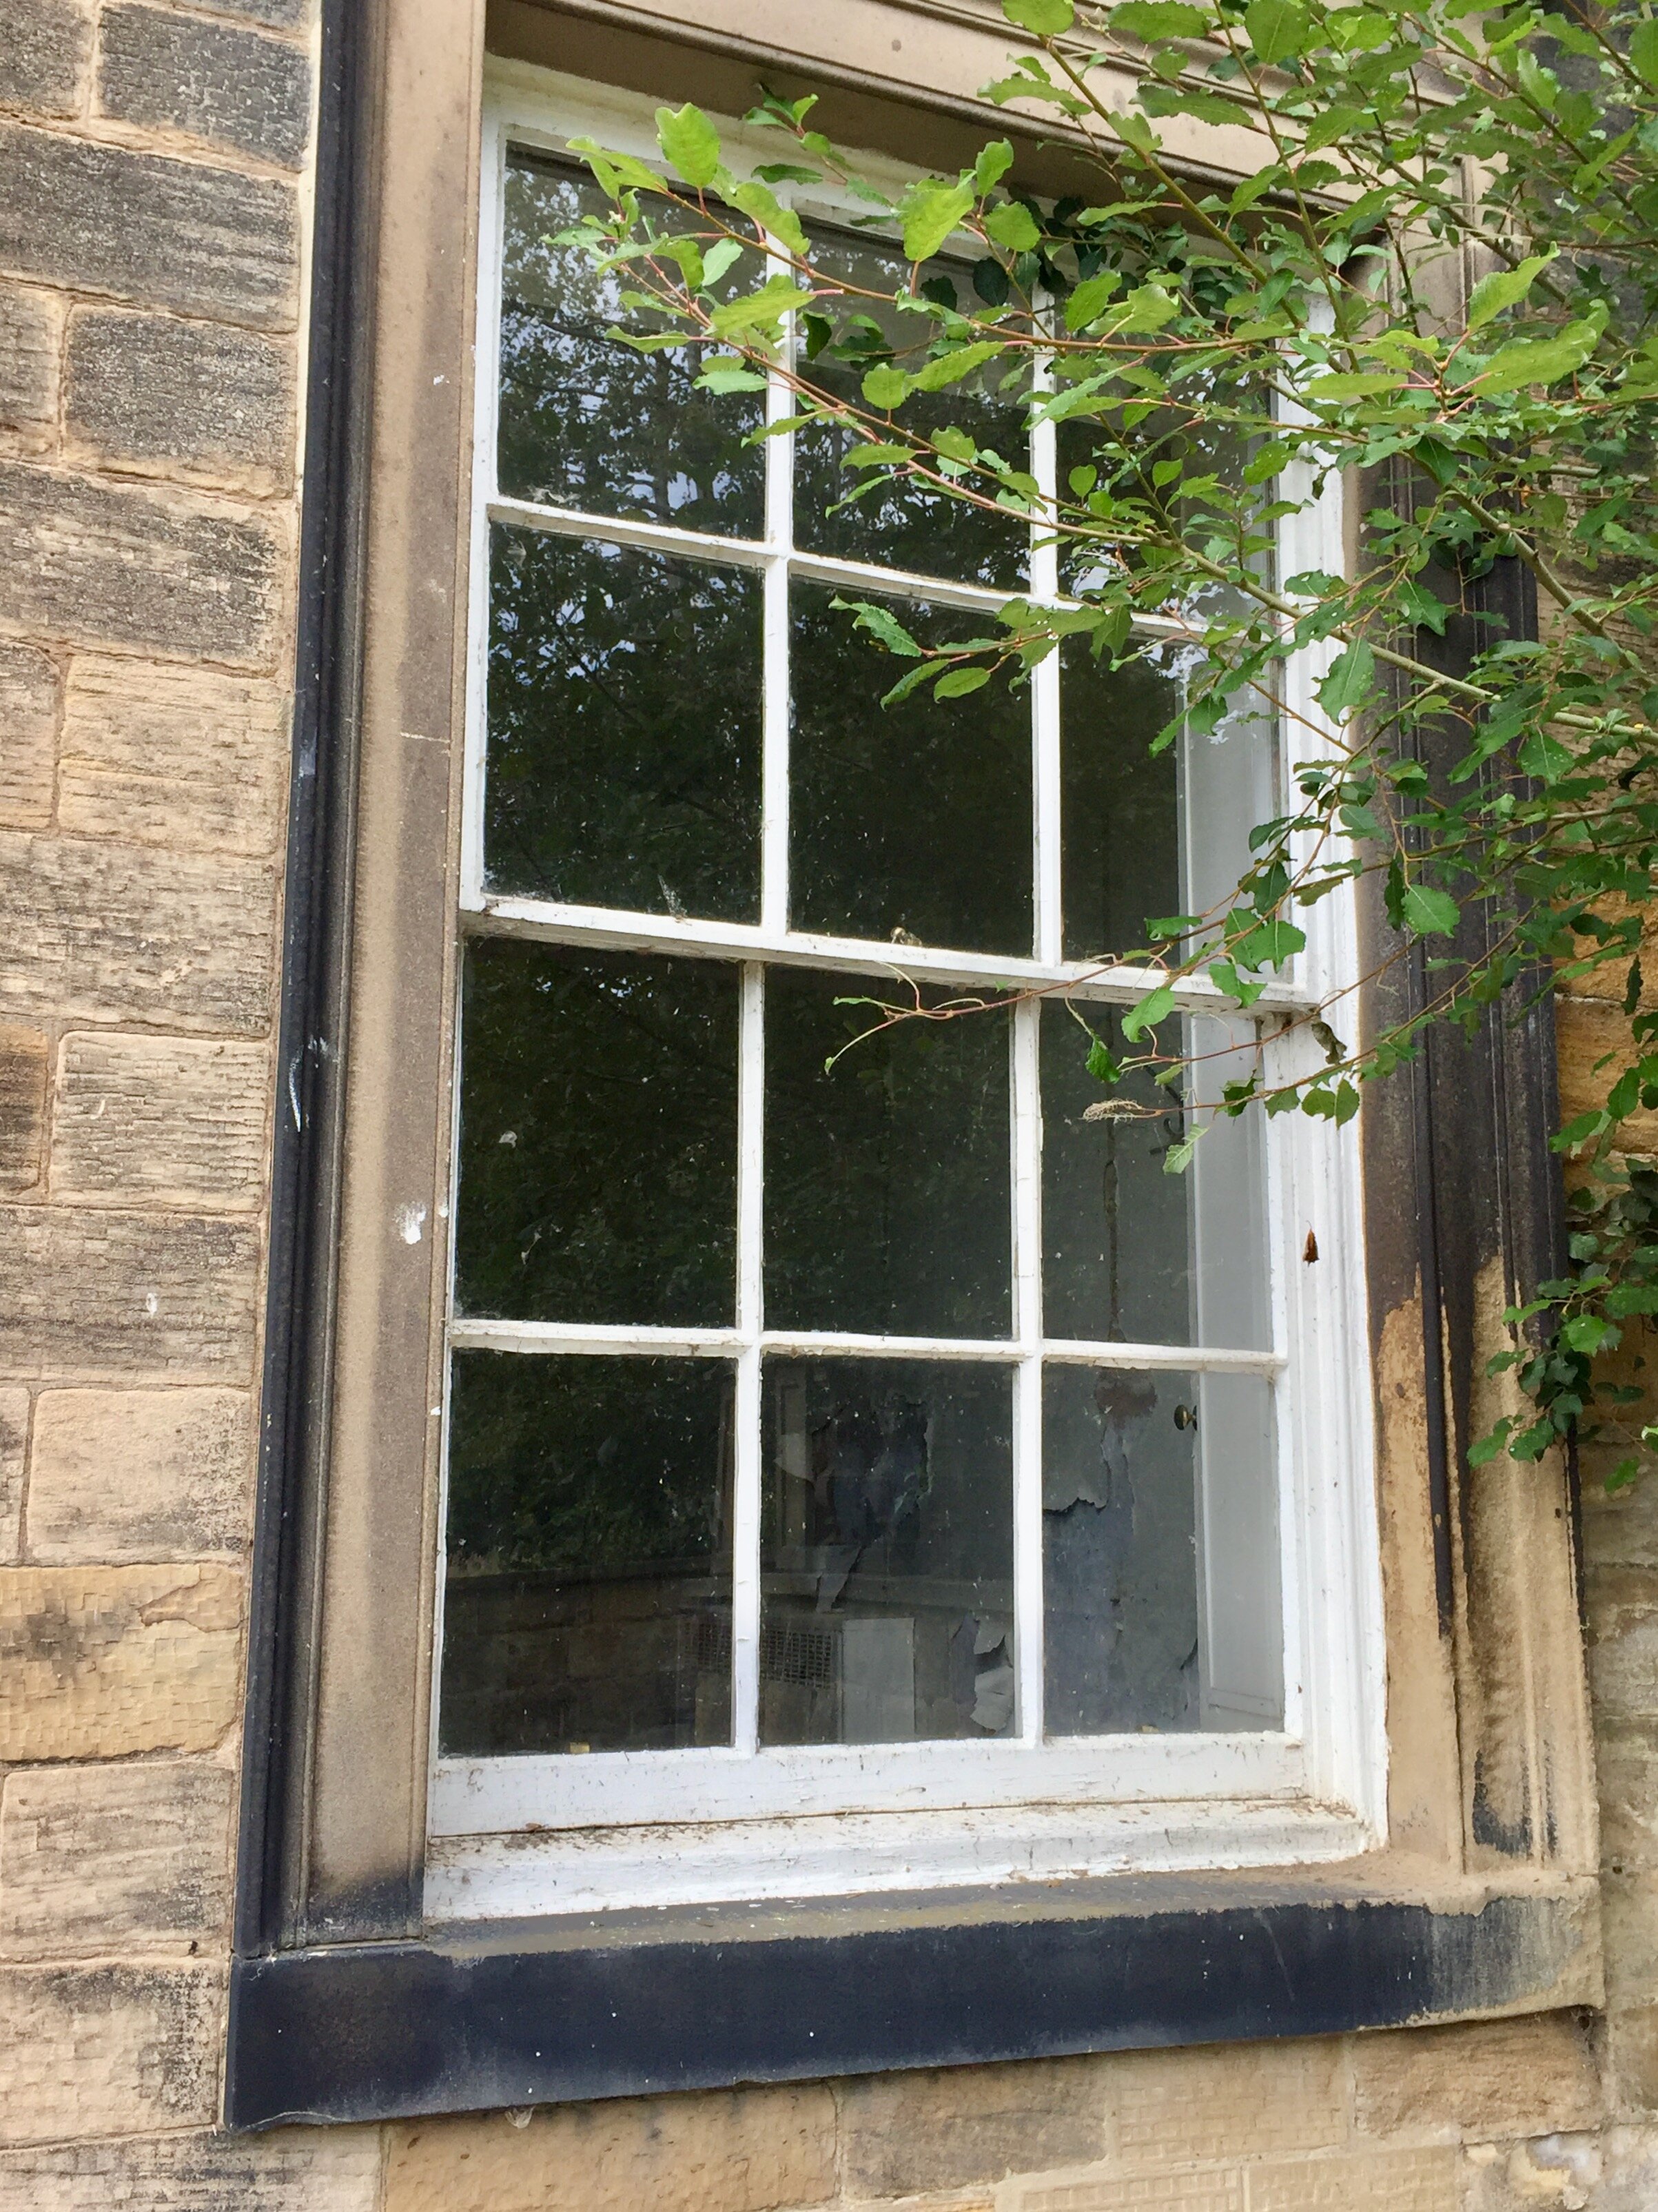  A window on the East side of Bretton Hall - even here, the interiors have been well-neglected. 